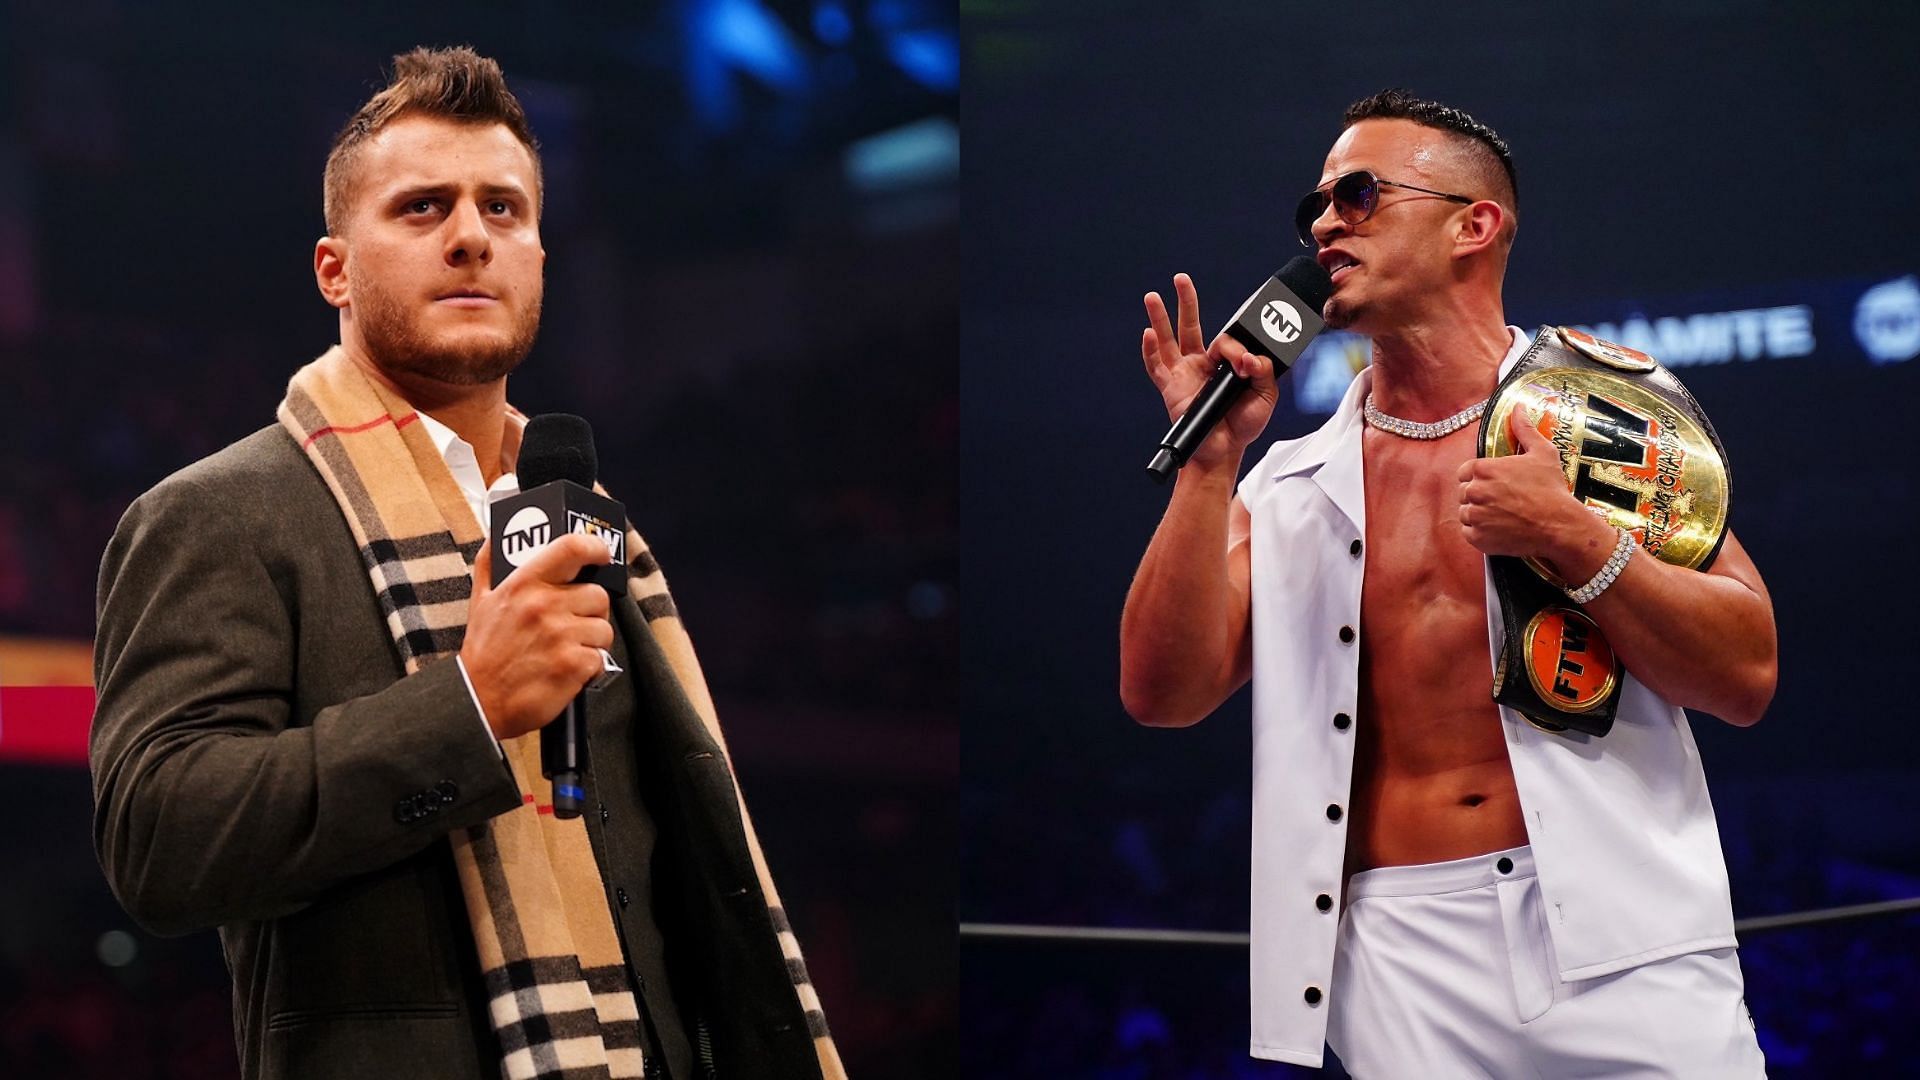 Could AEW stars MJF (left) and Ricky Starks (right) make the jump to WWE?